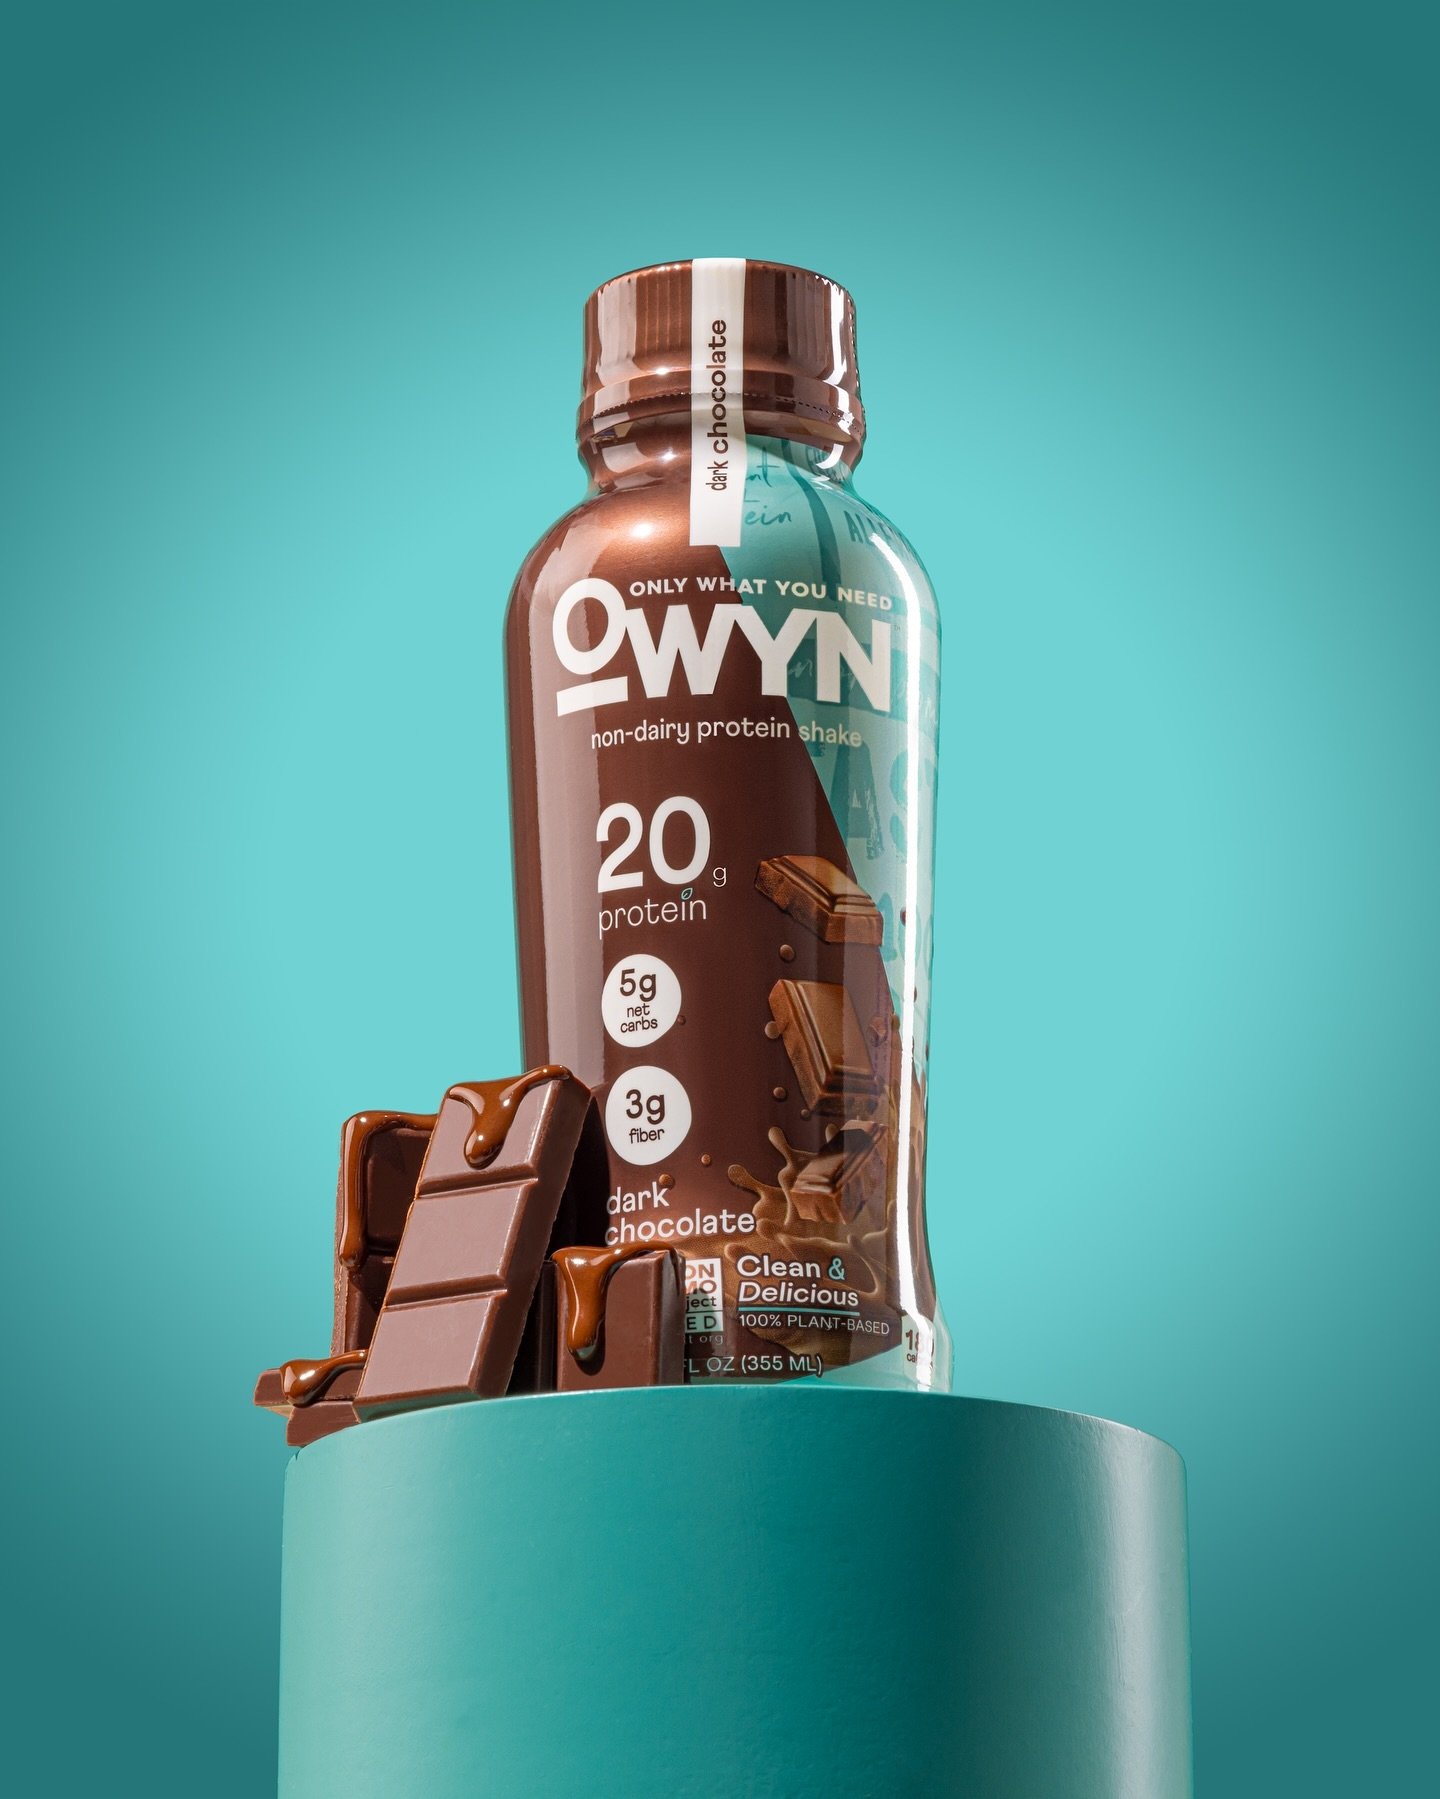 🍫 shot for @liveowyn 🩵

.
.
.
.
.
#productphotography #beveragephotography #stilllifephotography #commercialphotography #advertisingphotography #photostudio #creativecontent #creativephotography #colorfulphotography #foodphotography